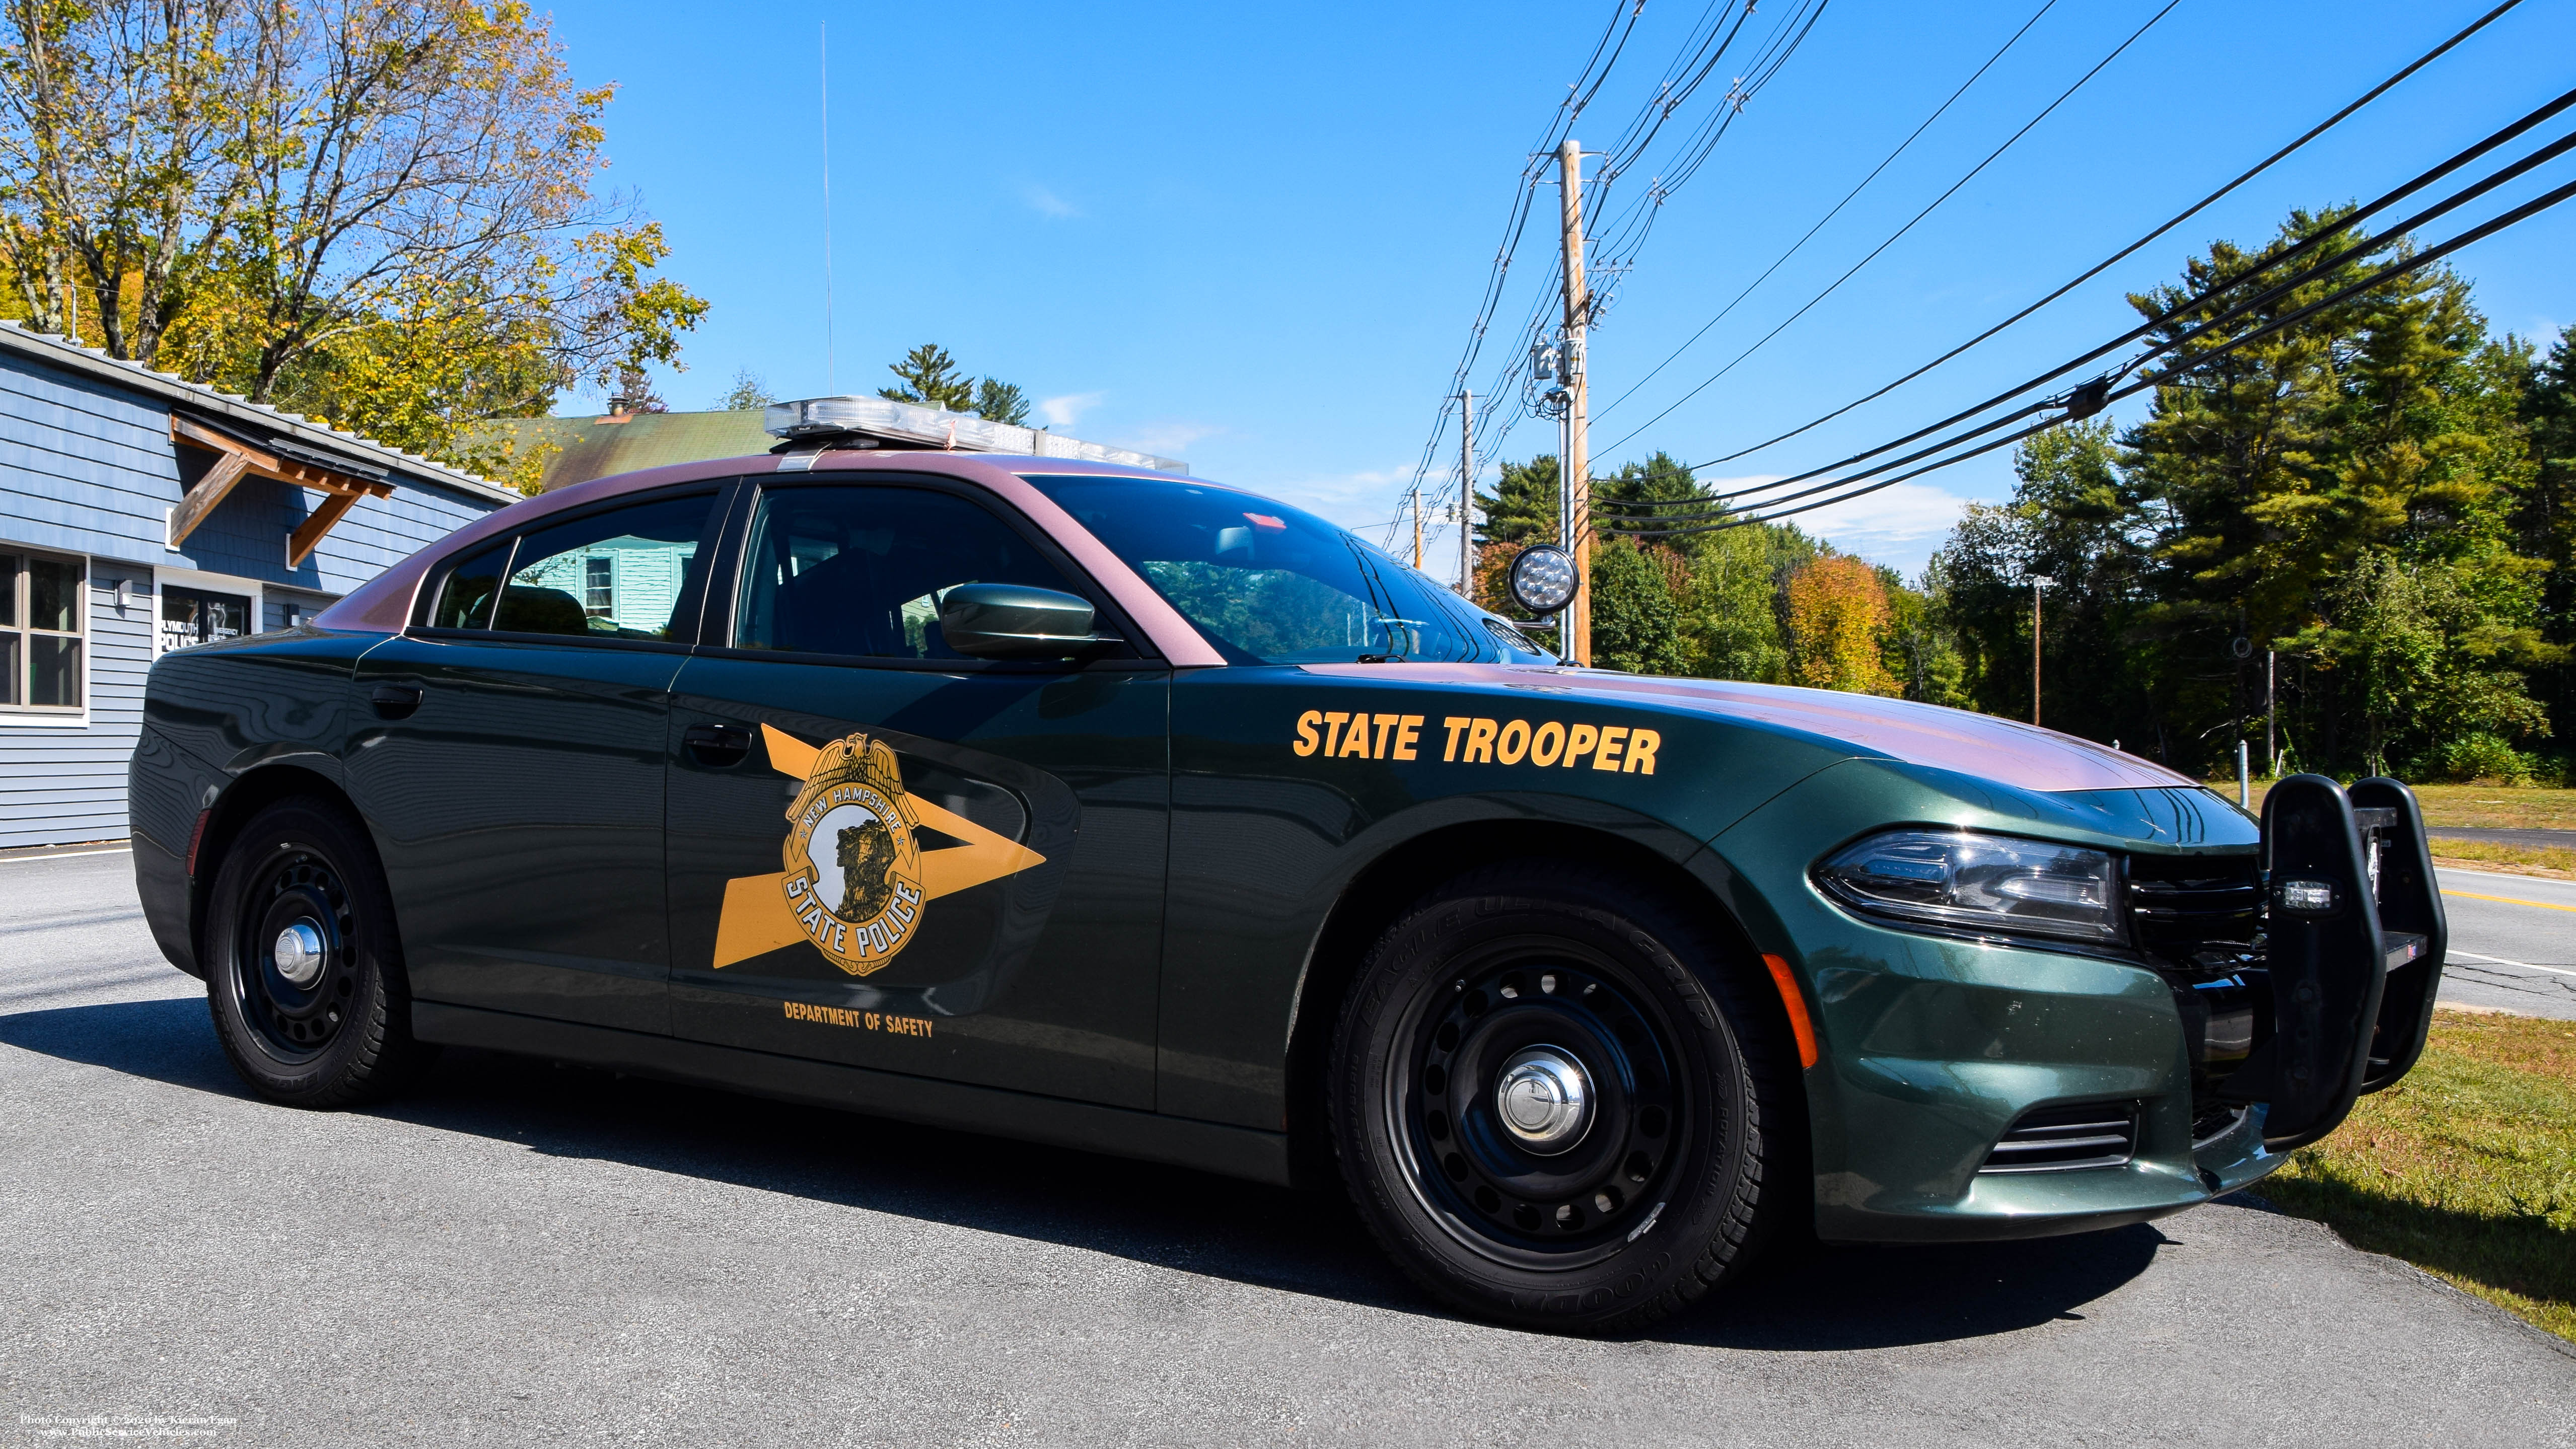 A photo  of New Hampshire State Police
            Cruiser 614, a 2015-2019 Dodge Charger             taken by Kieran Egan